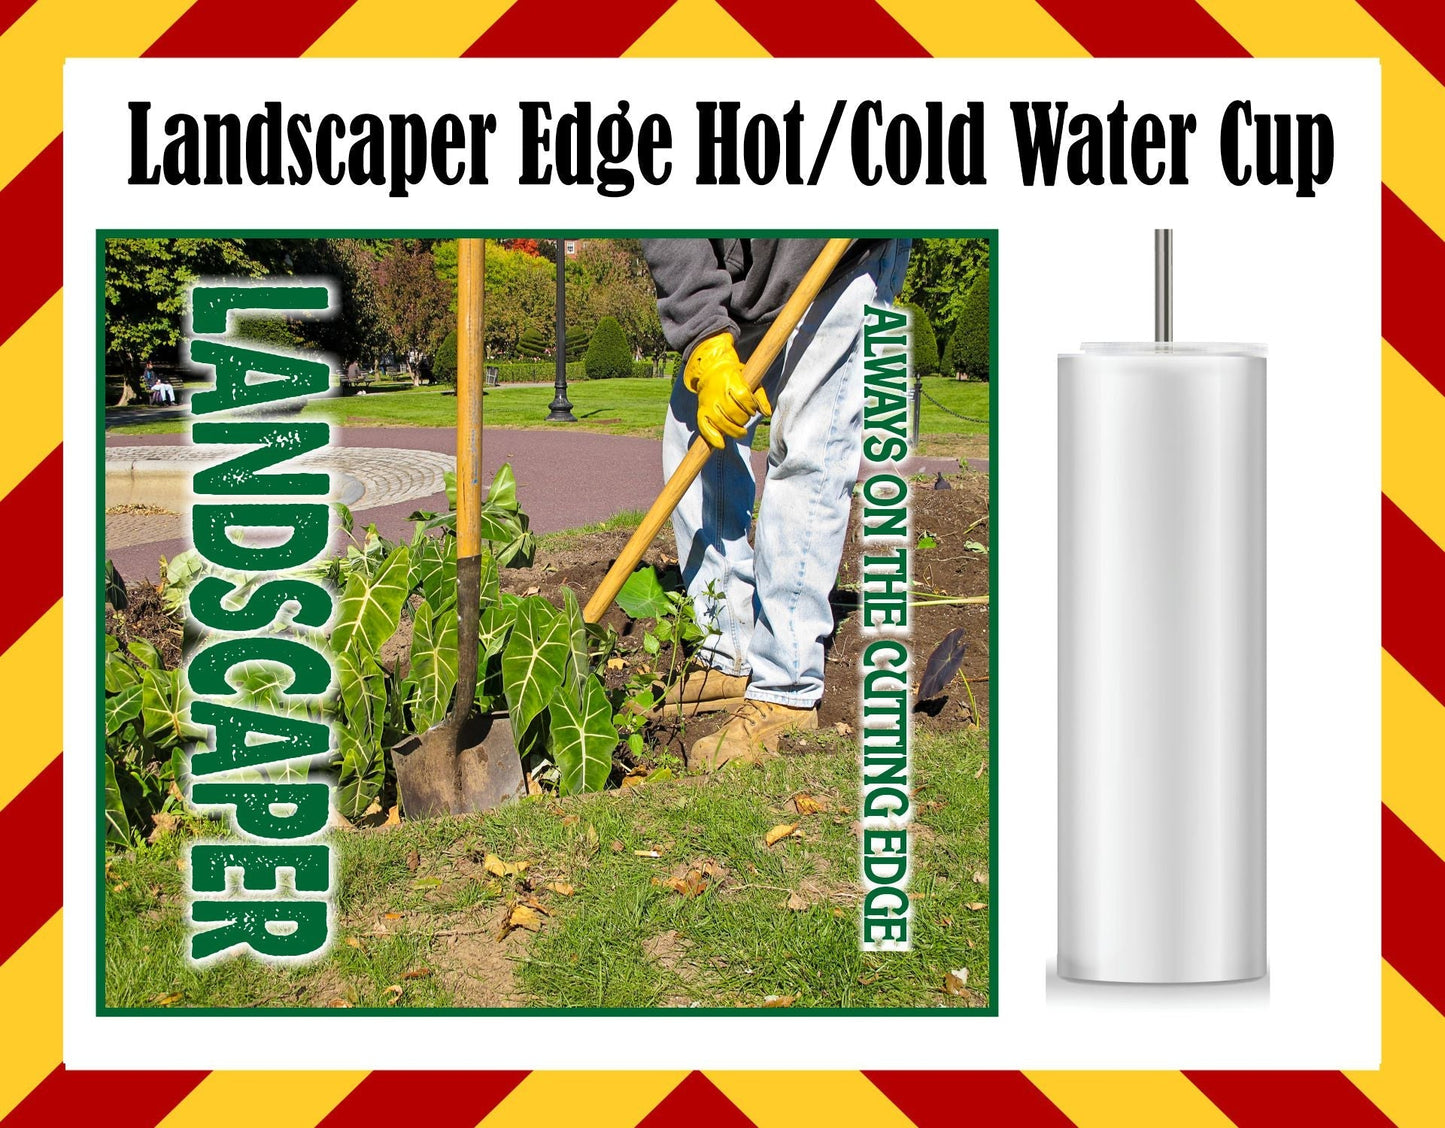 Stainless Steel Cup -   Landscaper Edge Design Hot/Cold Cup